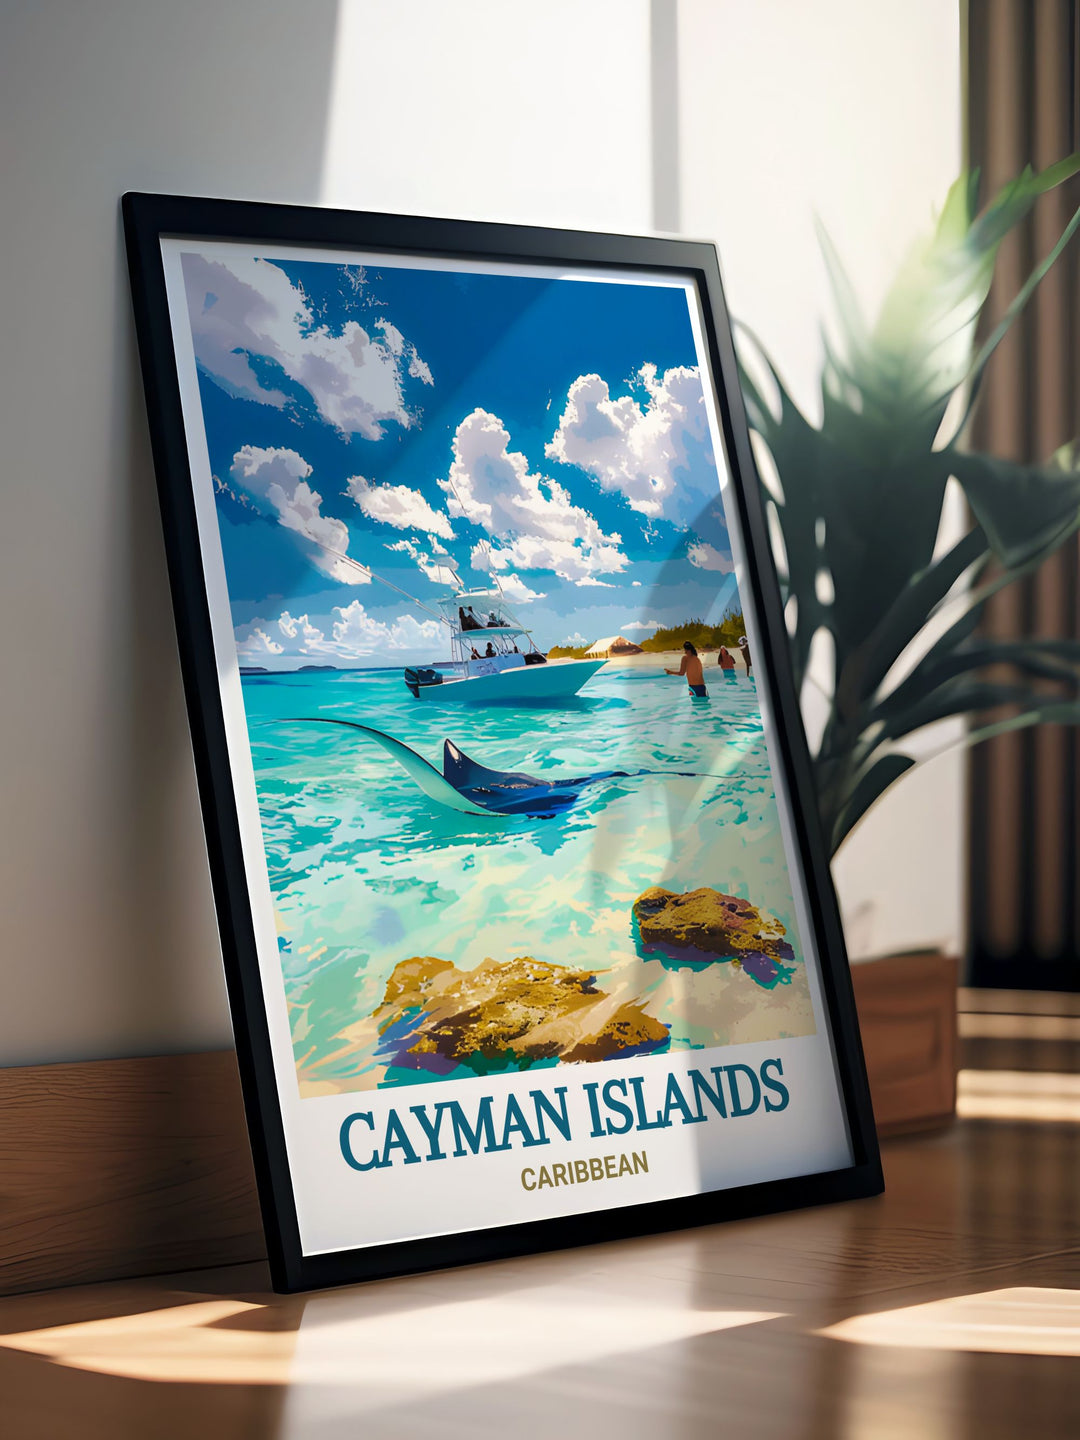 Elegant Stingray City artwork in a vintage style capturing the enchanting allure of the Cayman Islands perfect for enhancing any room with its charming black and white aesthetic and ideal as an anniversary or birthday gift